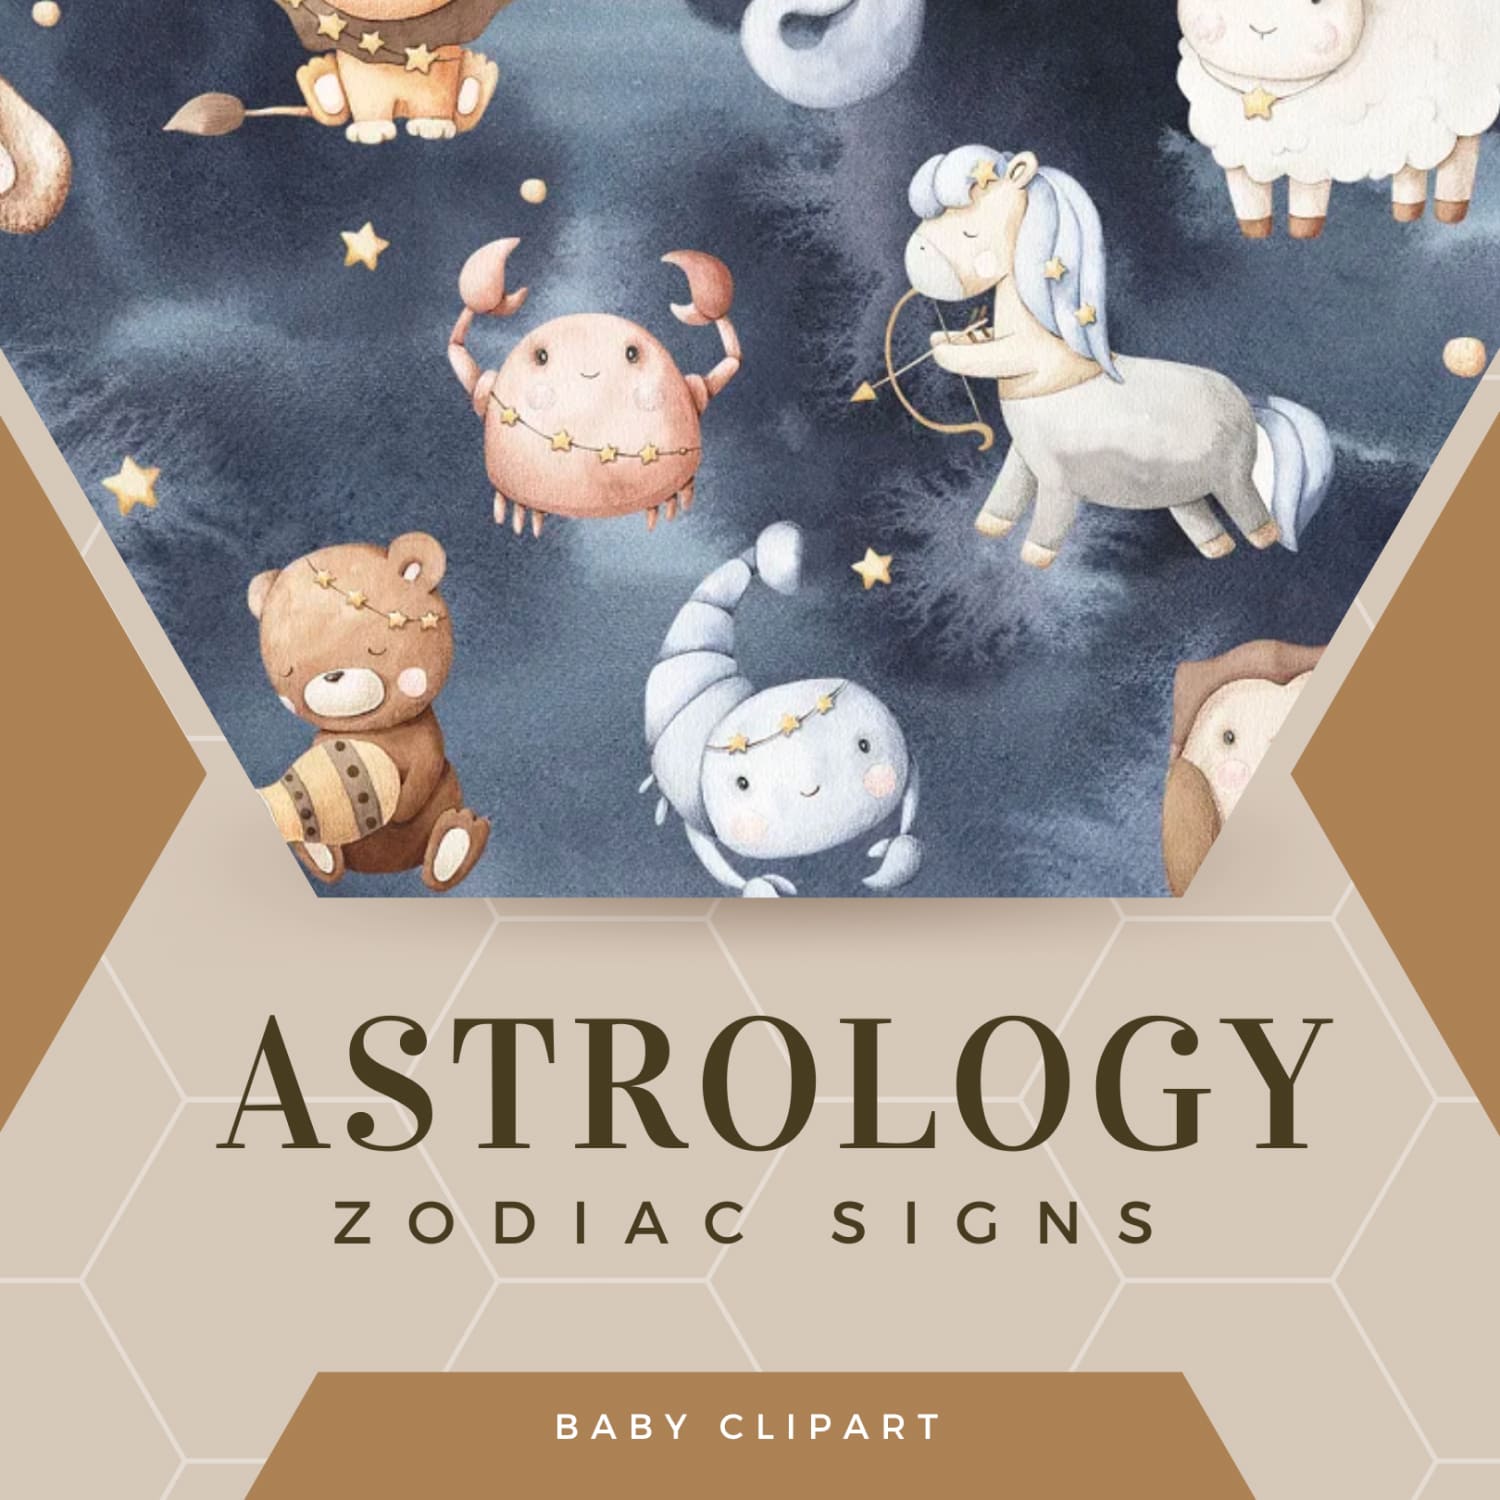 Baby Zodiac Signs Clipart - main image preview.